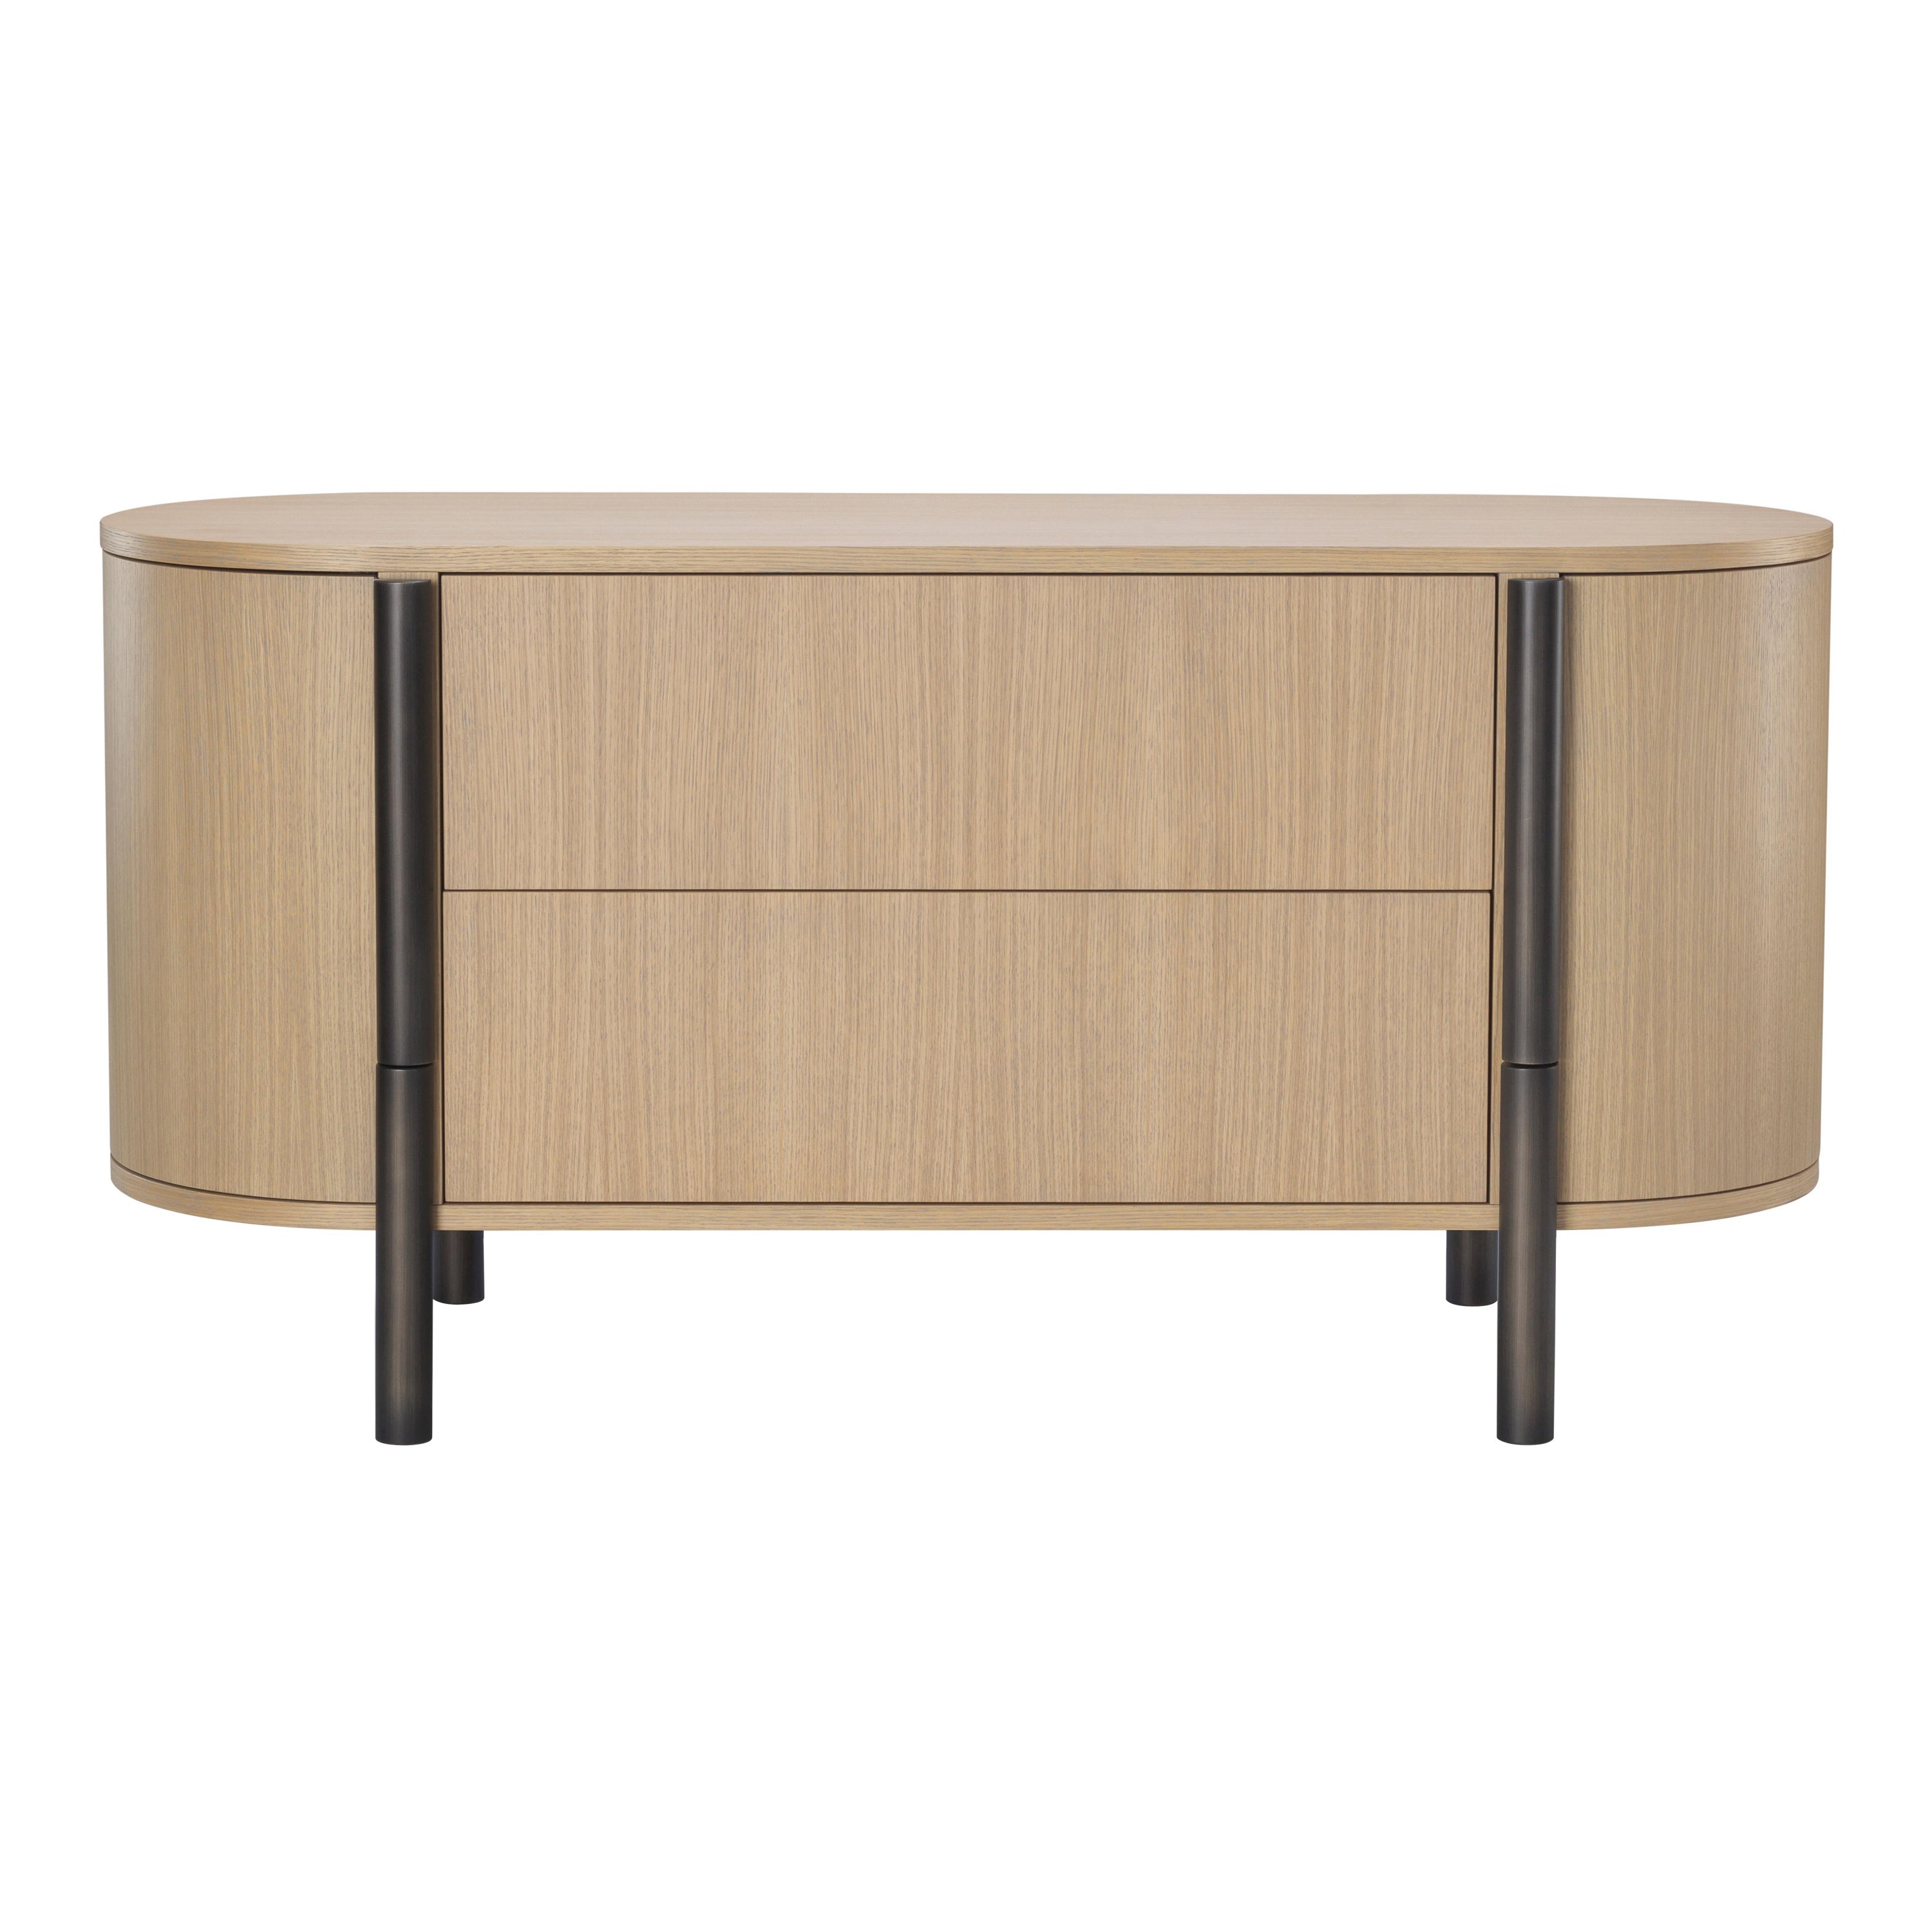 Tarantino Chest of Drawers, Wood and Burnished Brass Structure, Made in Italy